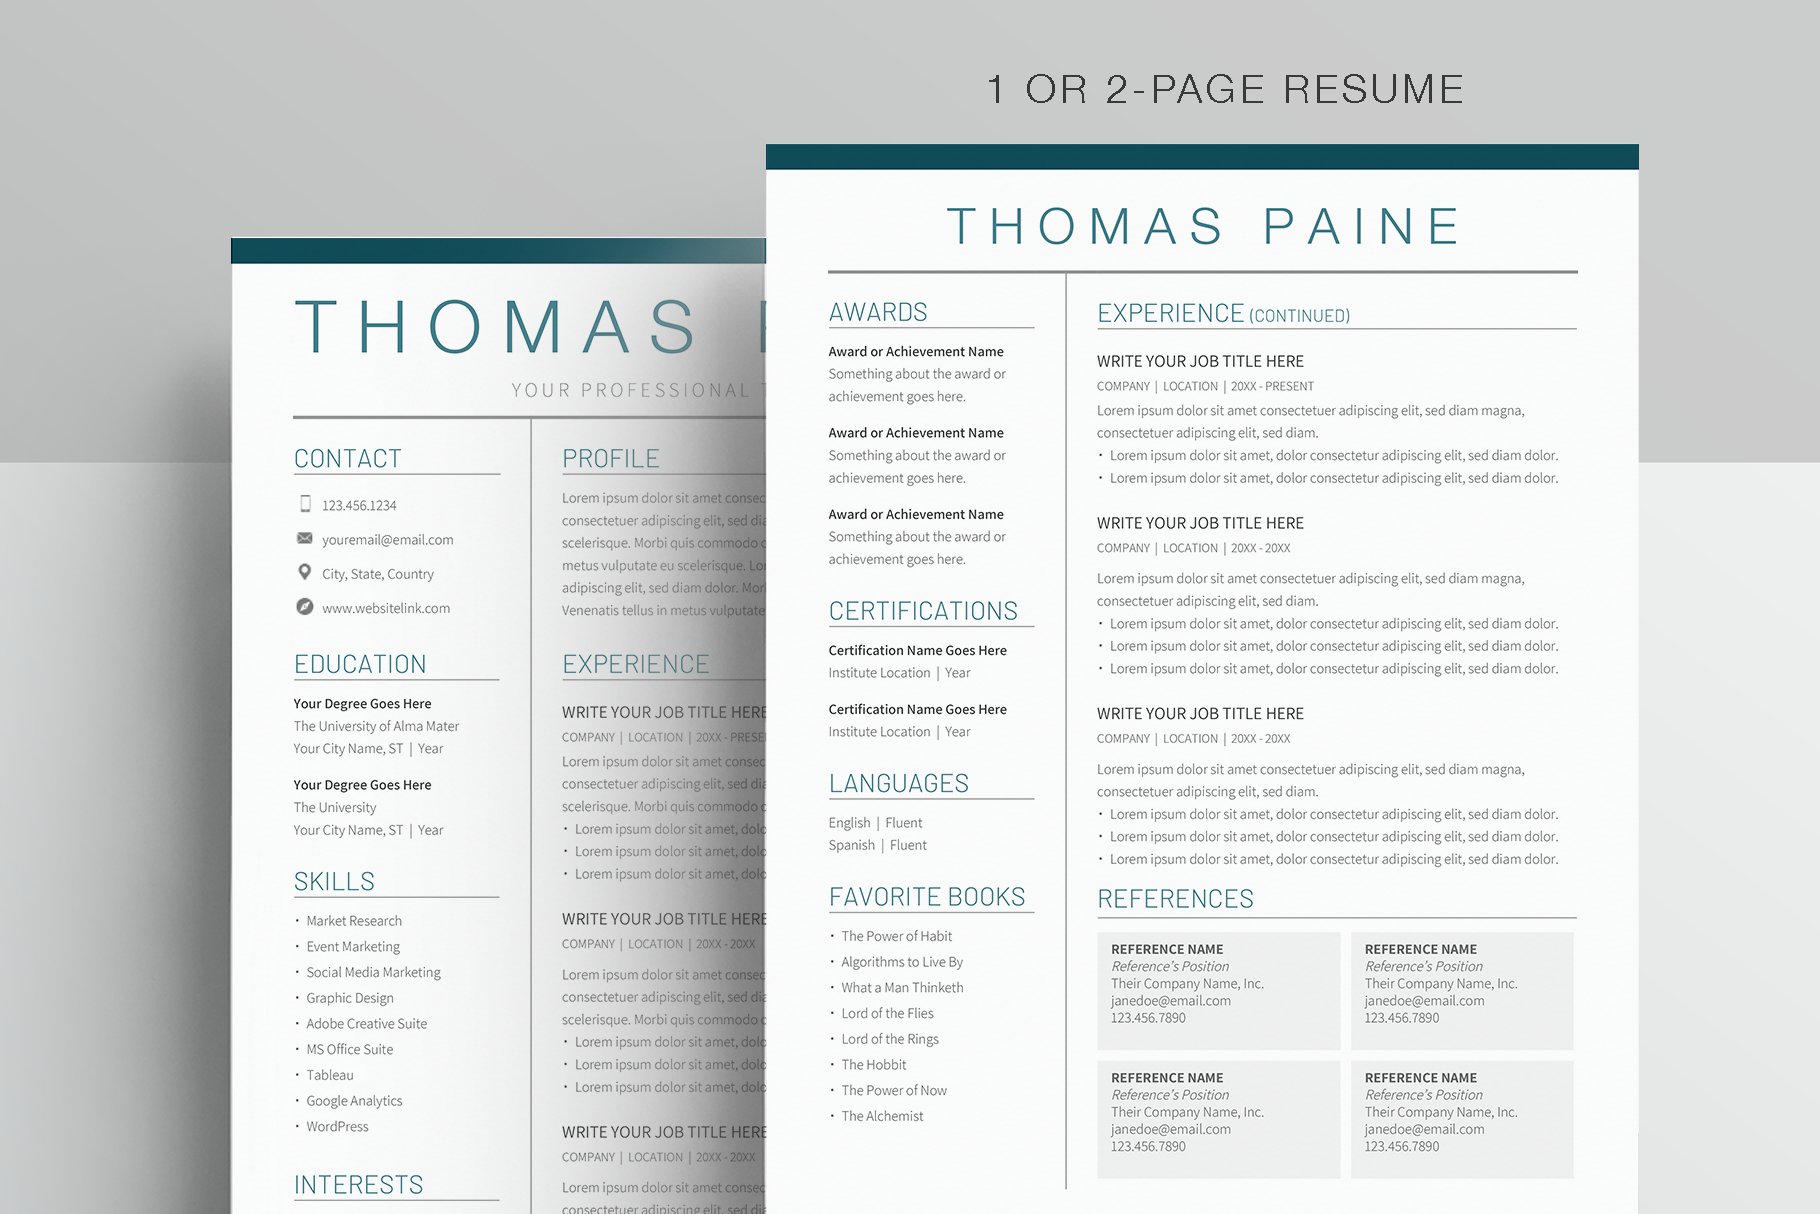 Google Docs Resume Template preview image.